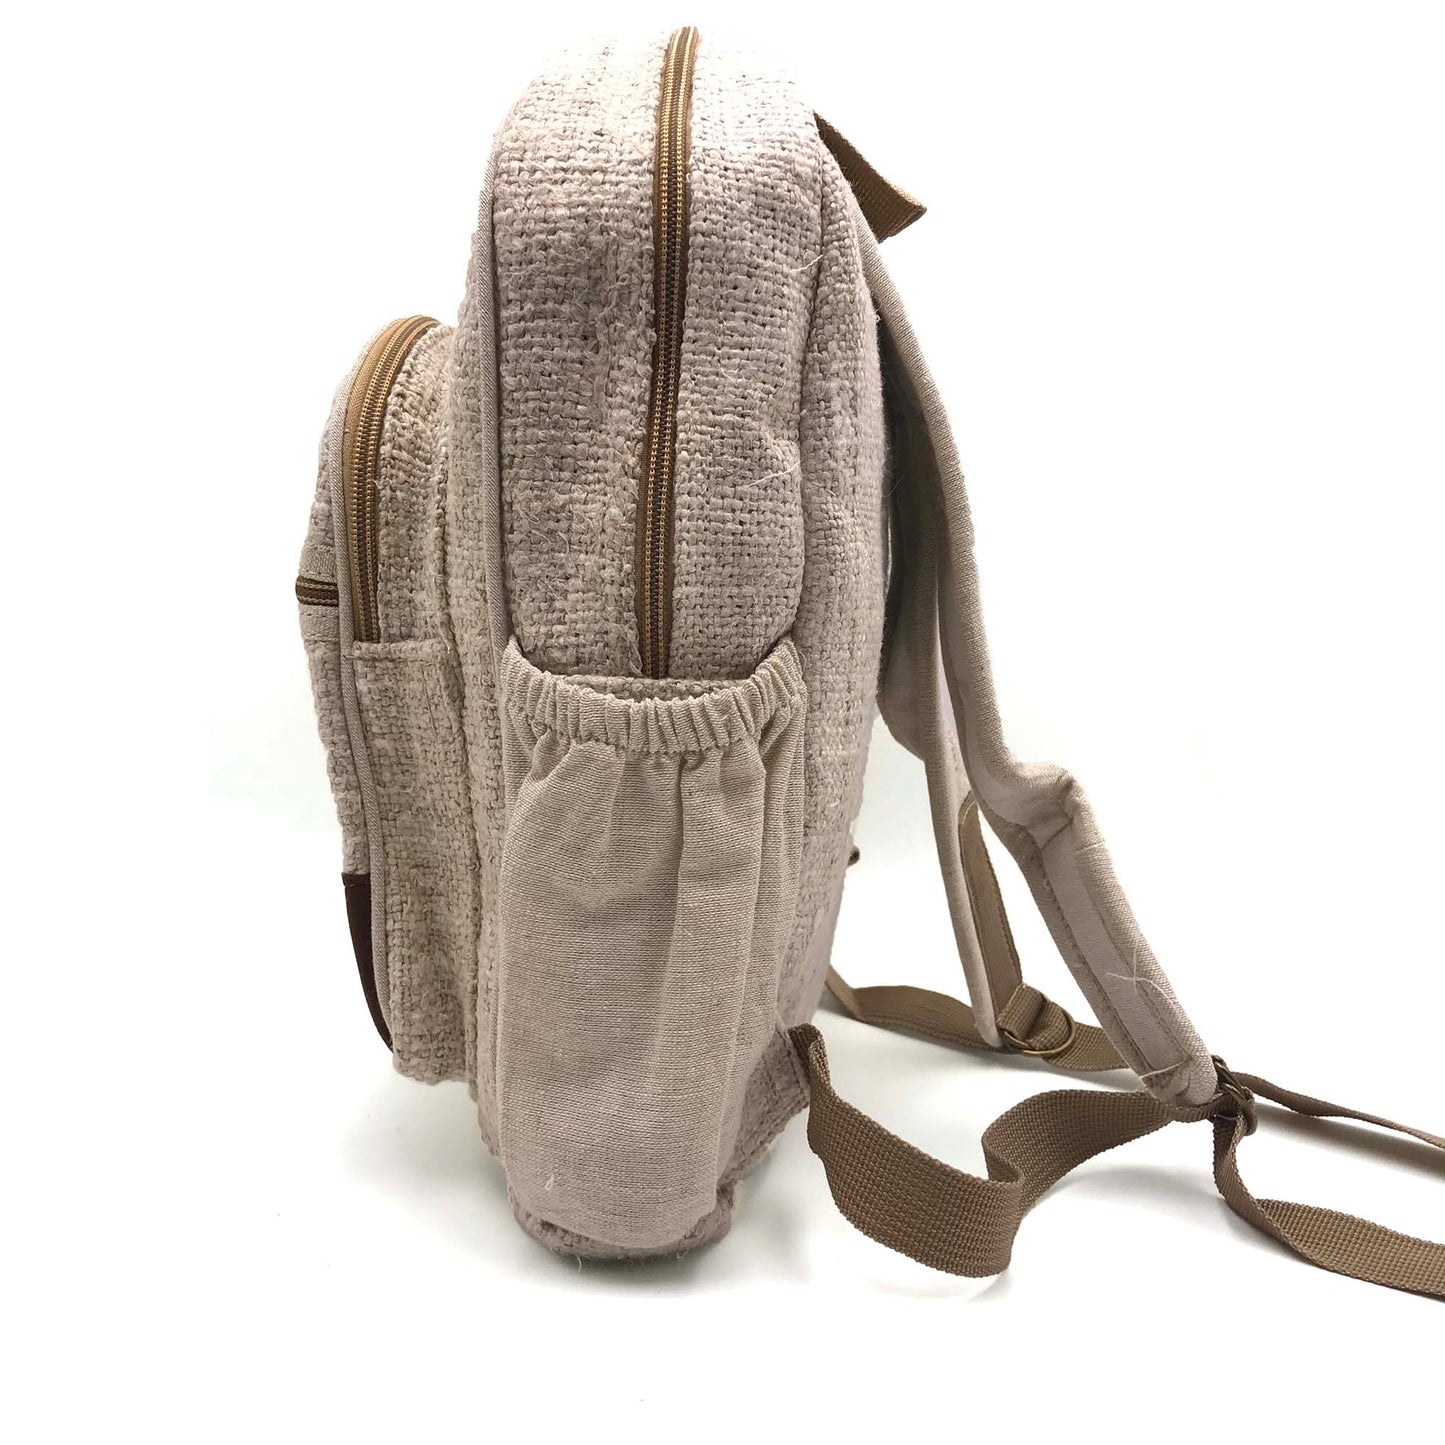 Backpack made from 100% pure hand-woven hemp side view